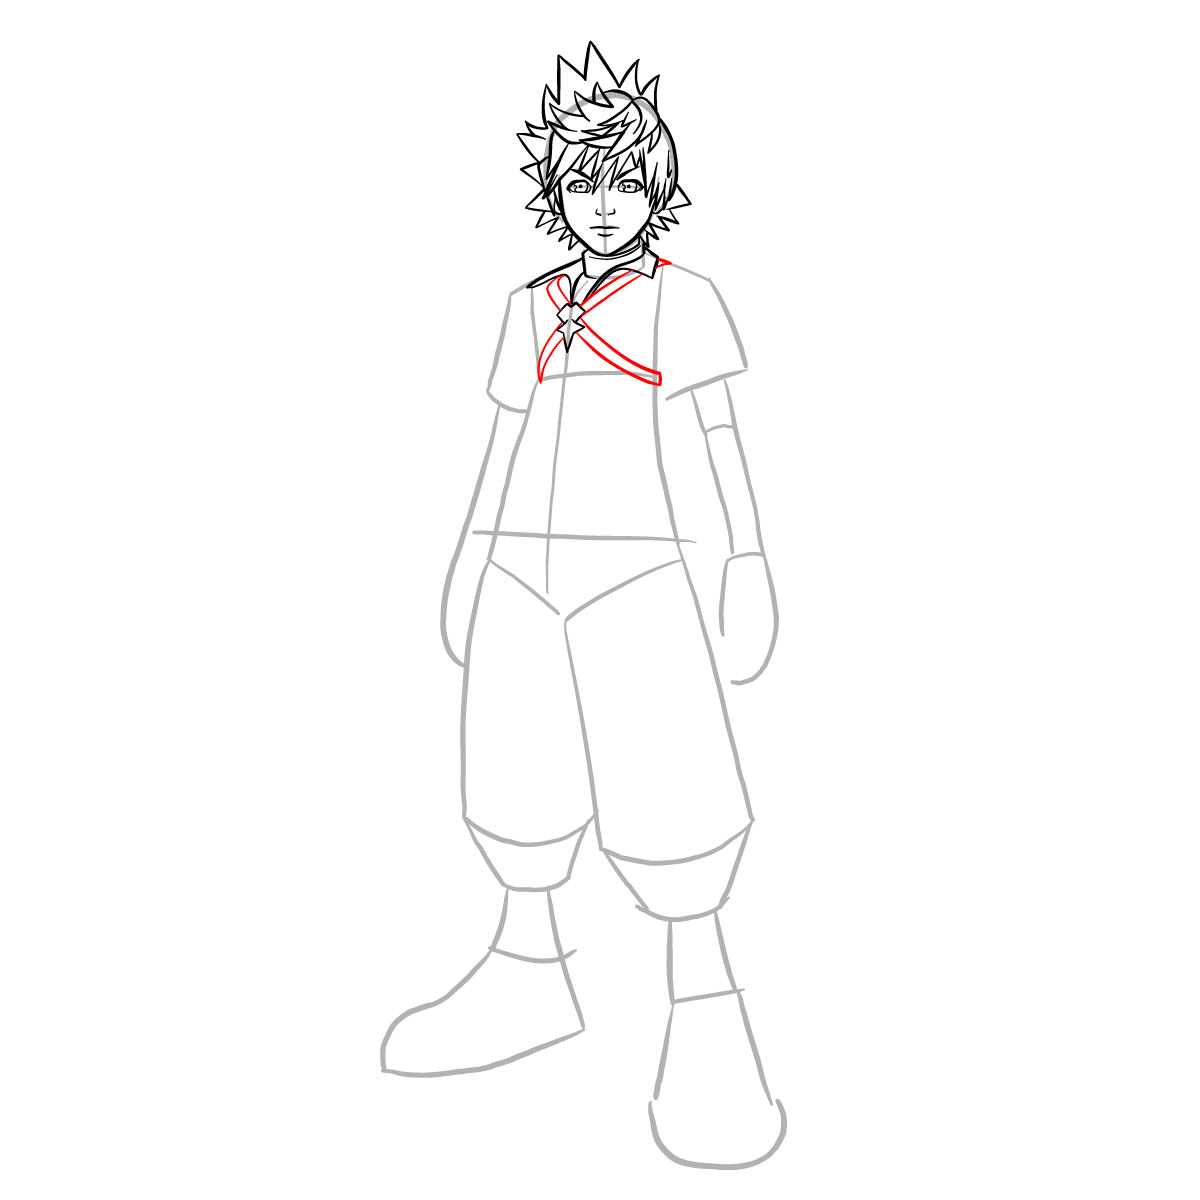 How to draw Ventus - step 20